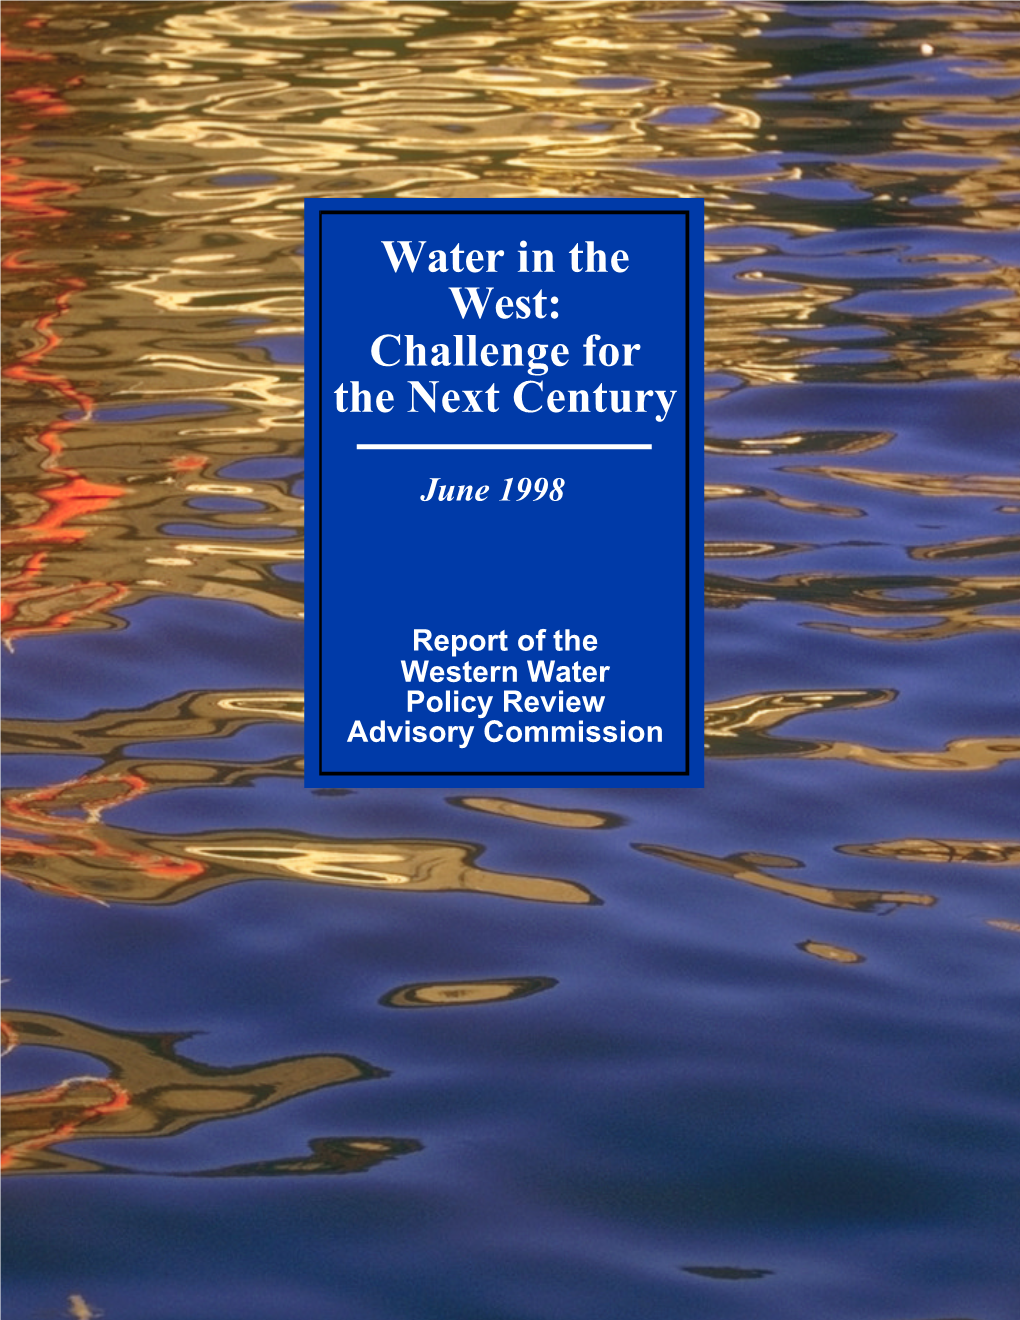 Report of the Western Water Policy Review Advisory Commission